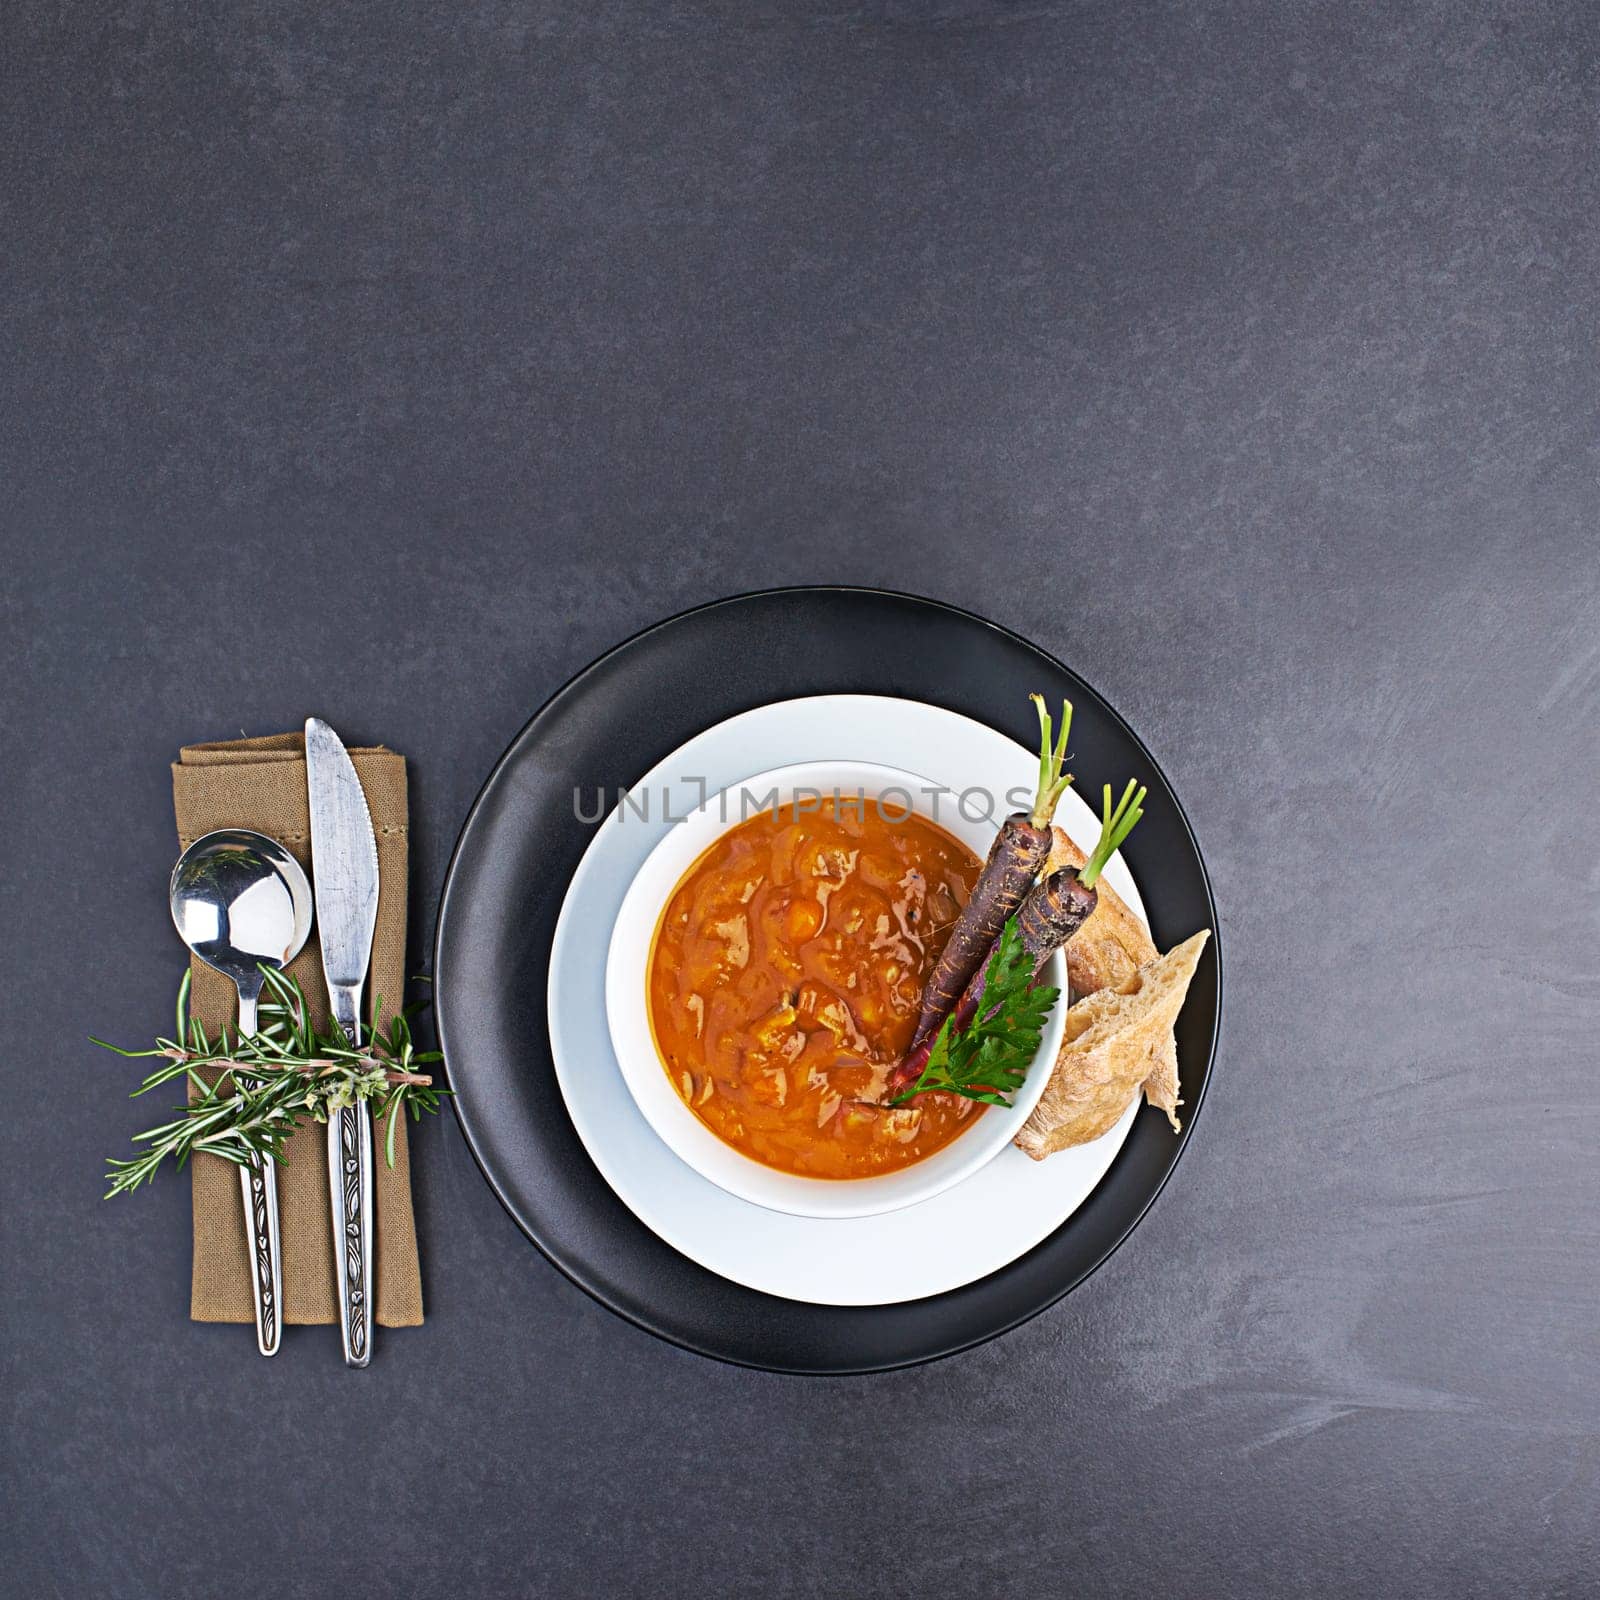 Vegetable, soup and bread on menu in restaurant with bowl of healthy food for diet and nutrition benefits. Dinner, dish and luxury appetizer course in fine dining kitchen with carrot on plate.